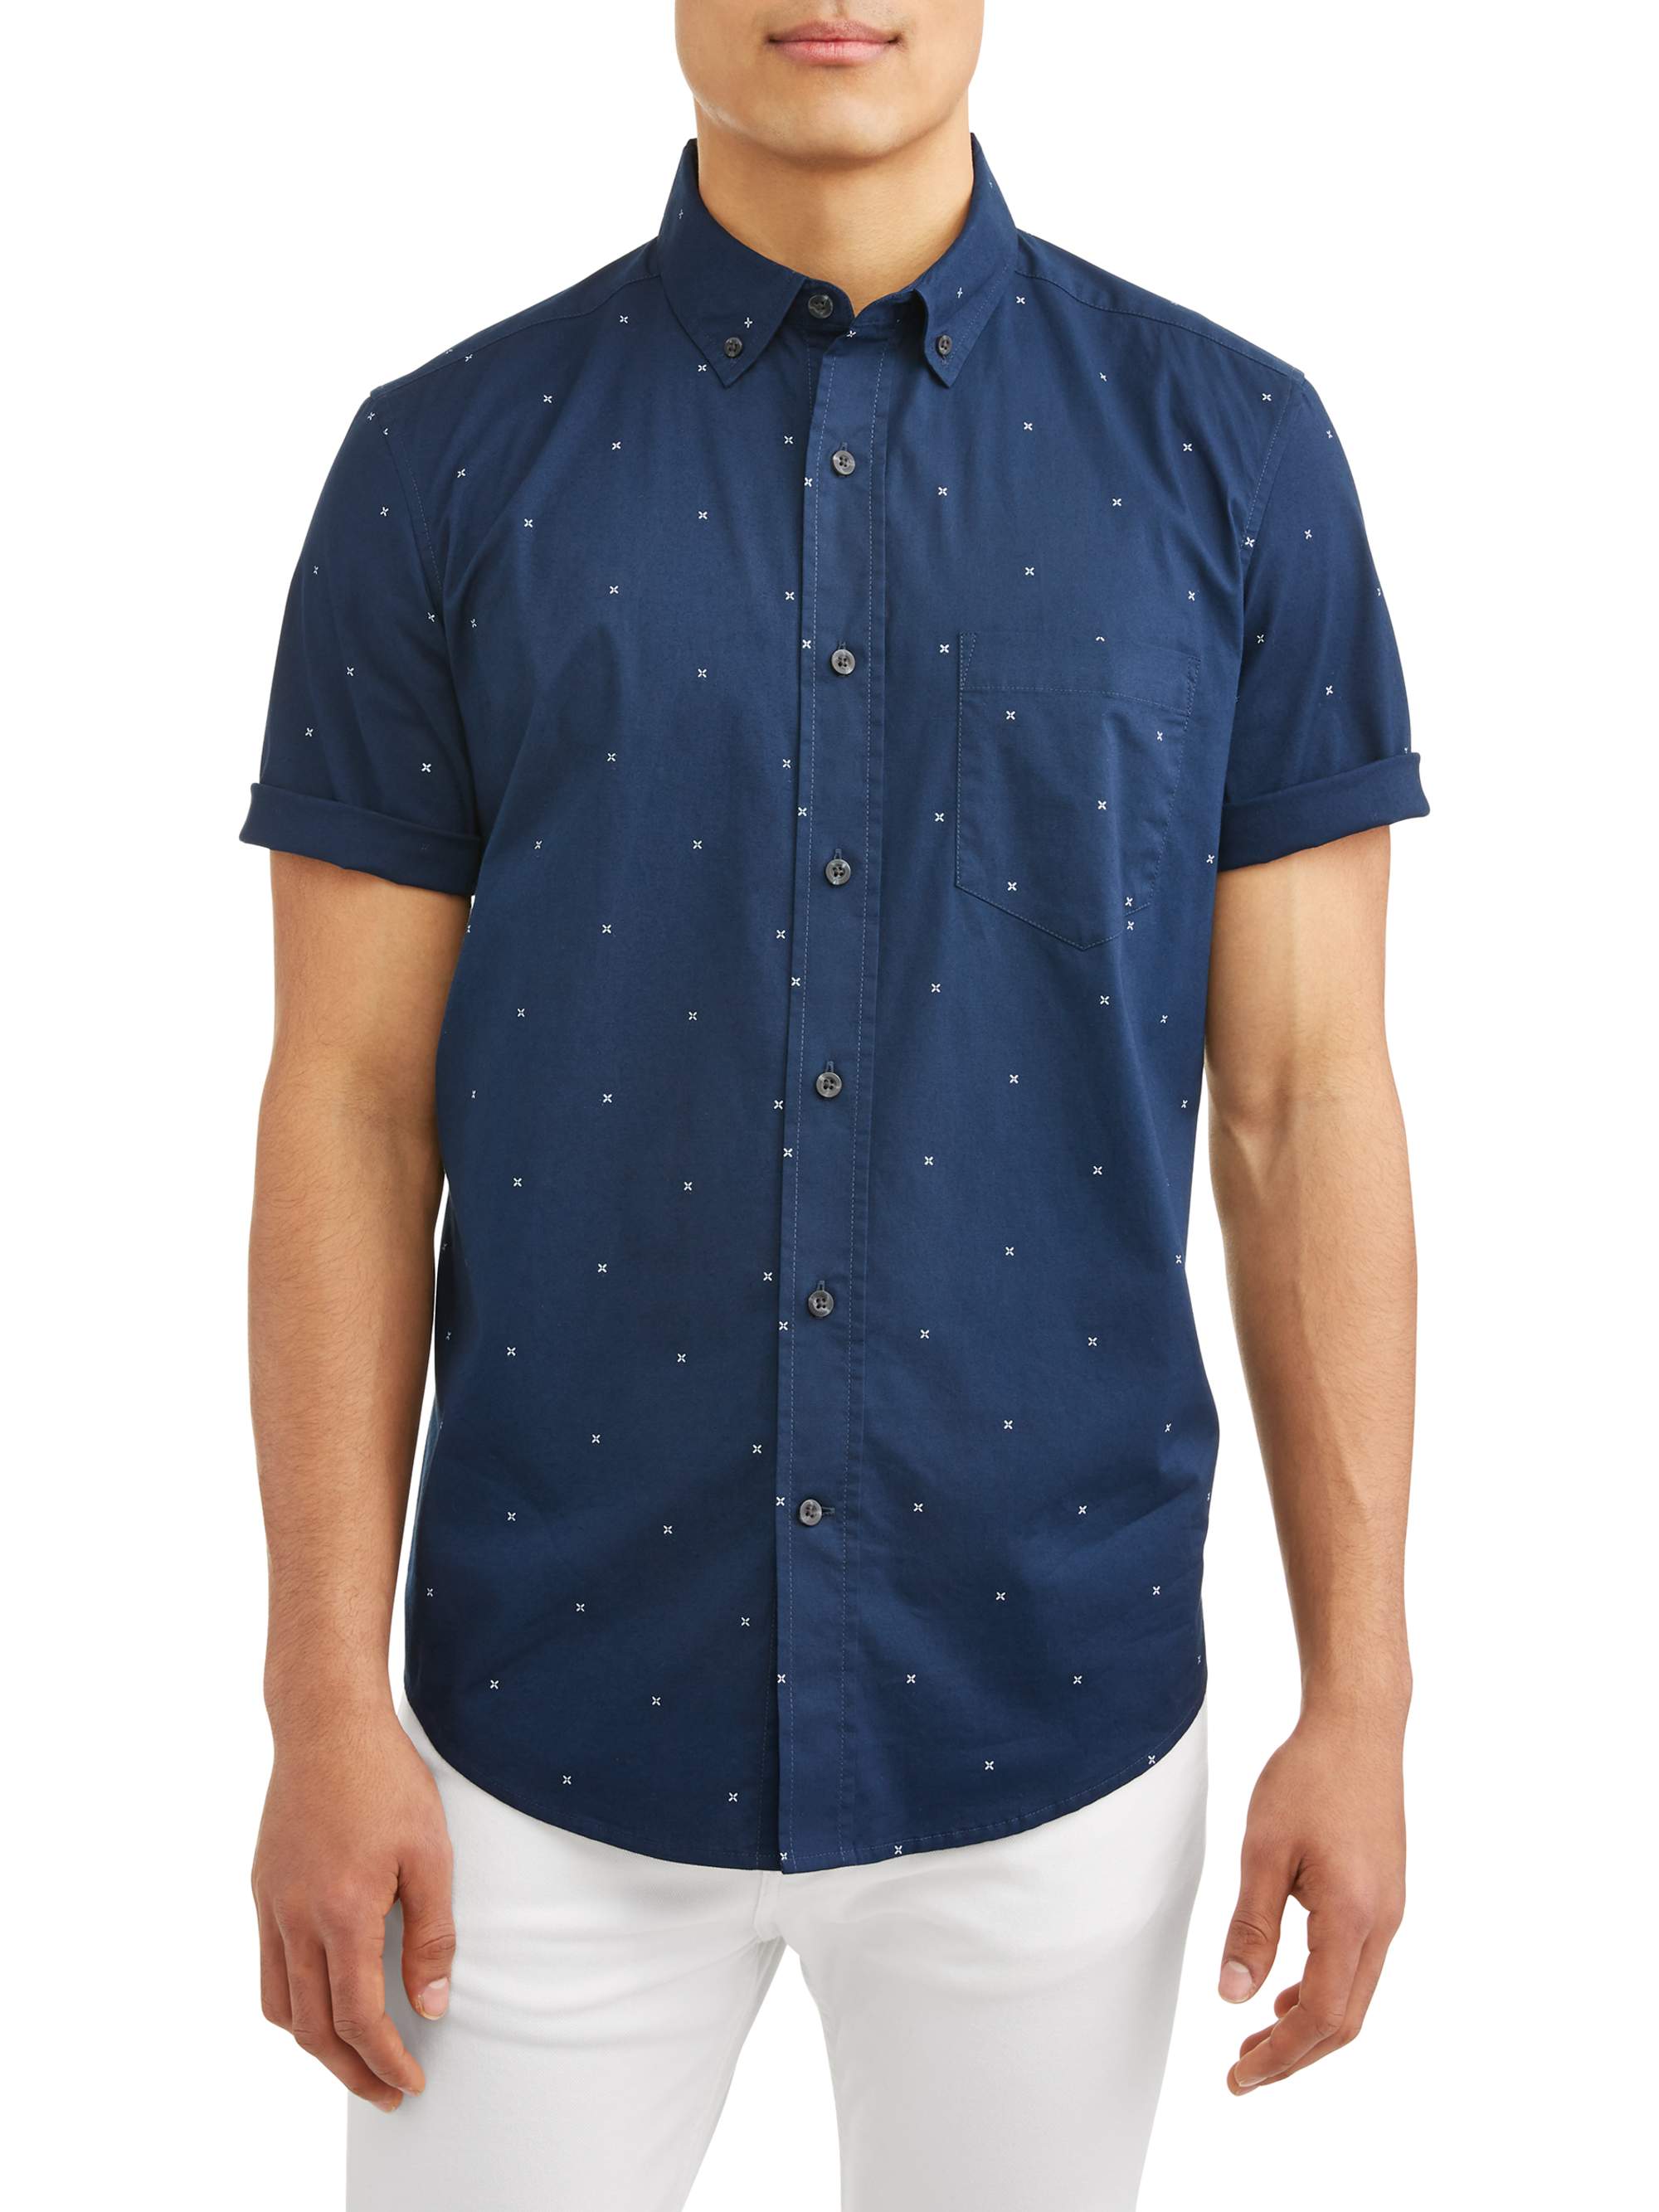 George Printed Stretch Woven Short Sleeve Shirt up to Size 5XL - image 1 of 4